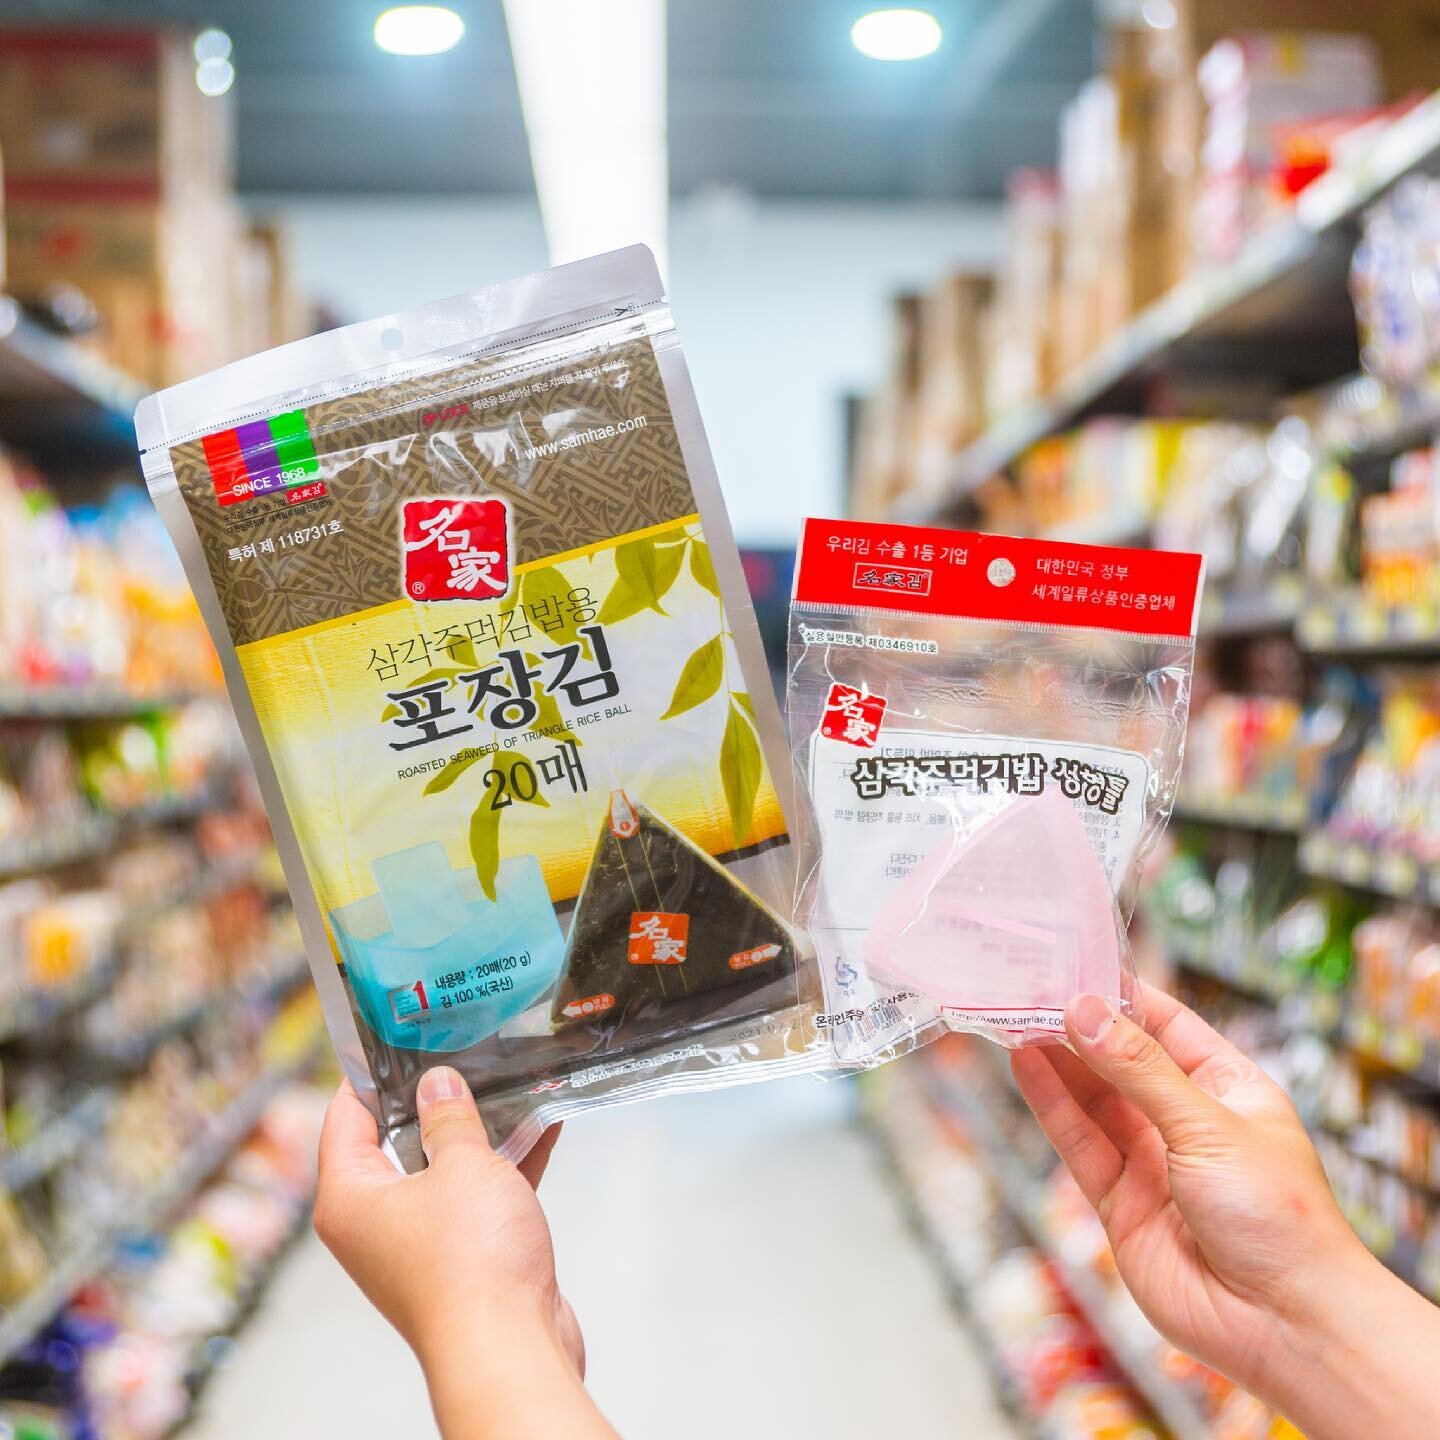 Who misses the tasty Onigiri (rice balls) from convenience stores in Japan and across Asia? 

You can now recreate them at home with our Onigiri kits! These include the iconic plastic wrapper to keep the rice and seaweed separate (keeping the seaweed